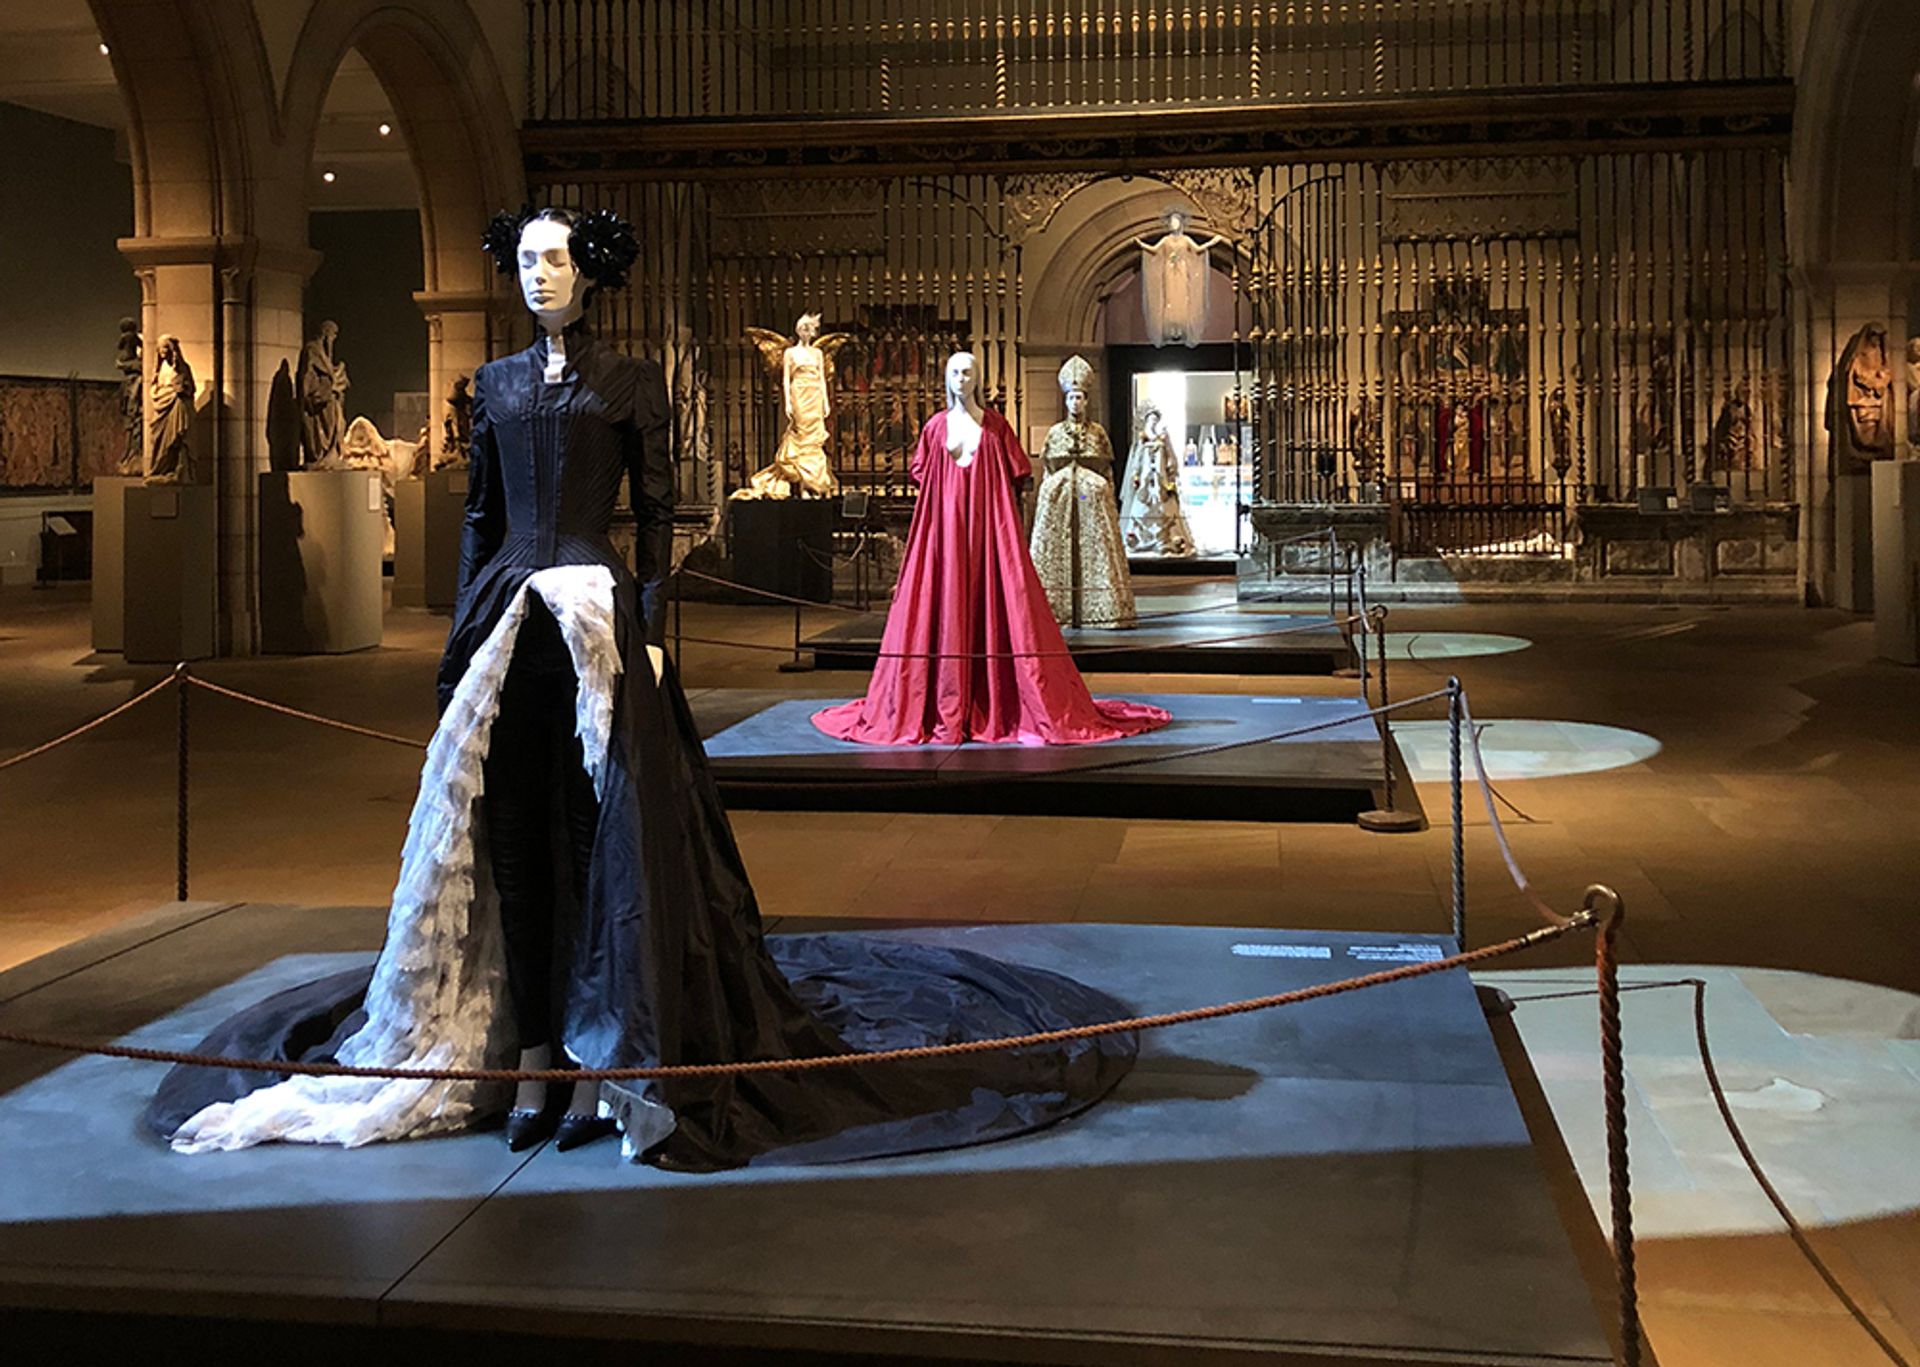 Installation of Heavenly Bodies: Fashion and the Catholic Imagination at the Met's Fifth Avenue building Photo: Victoria Stapley-Brown